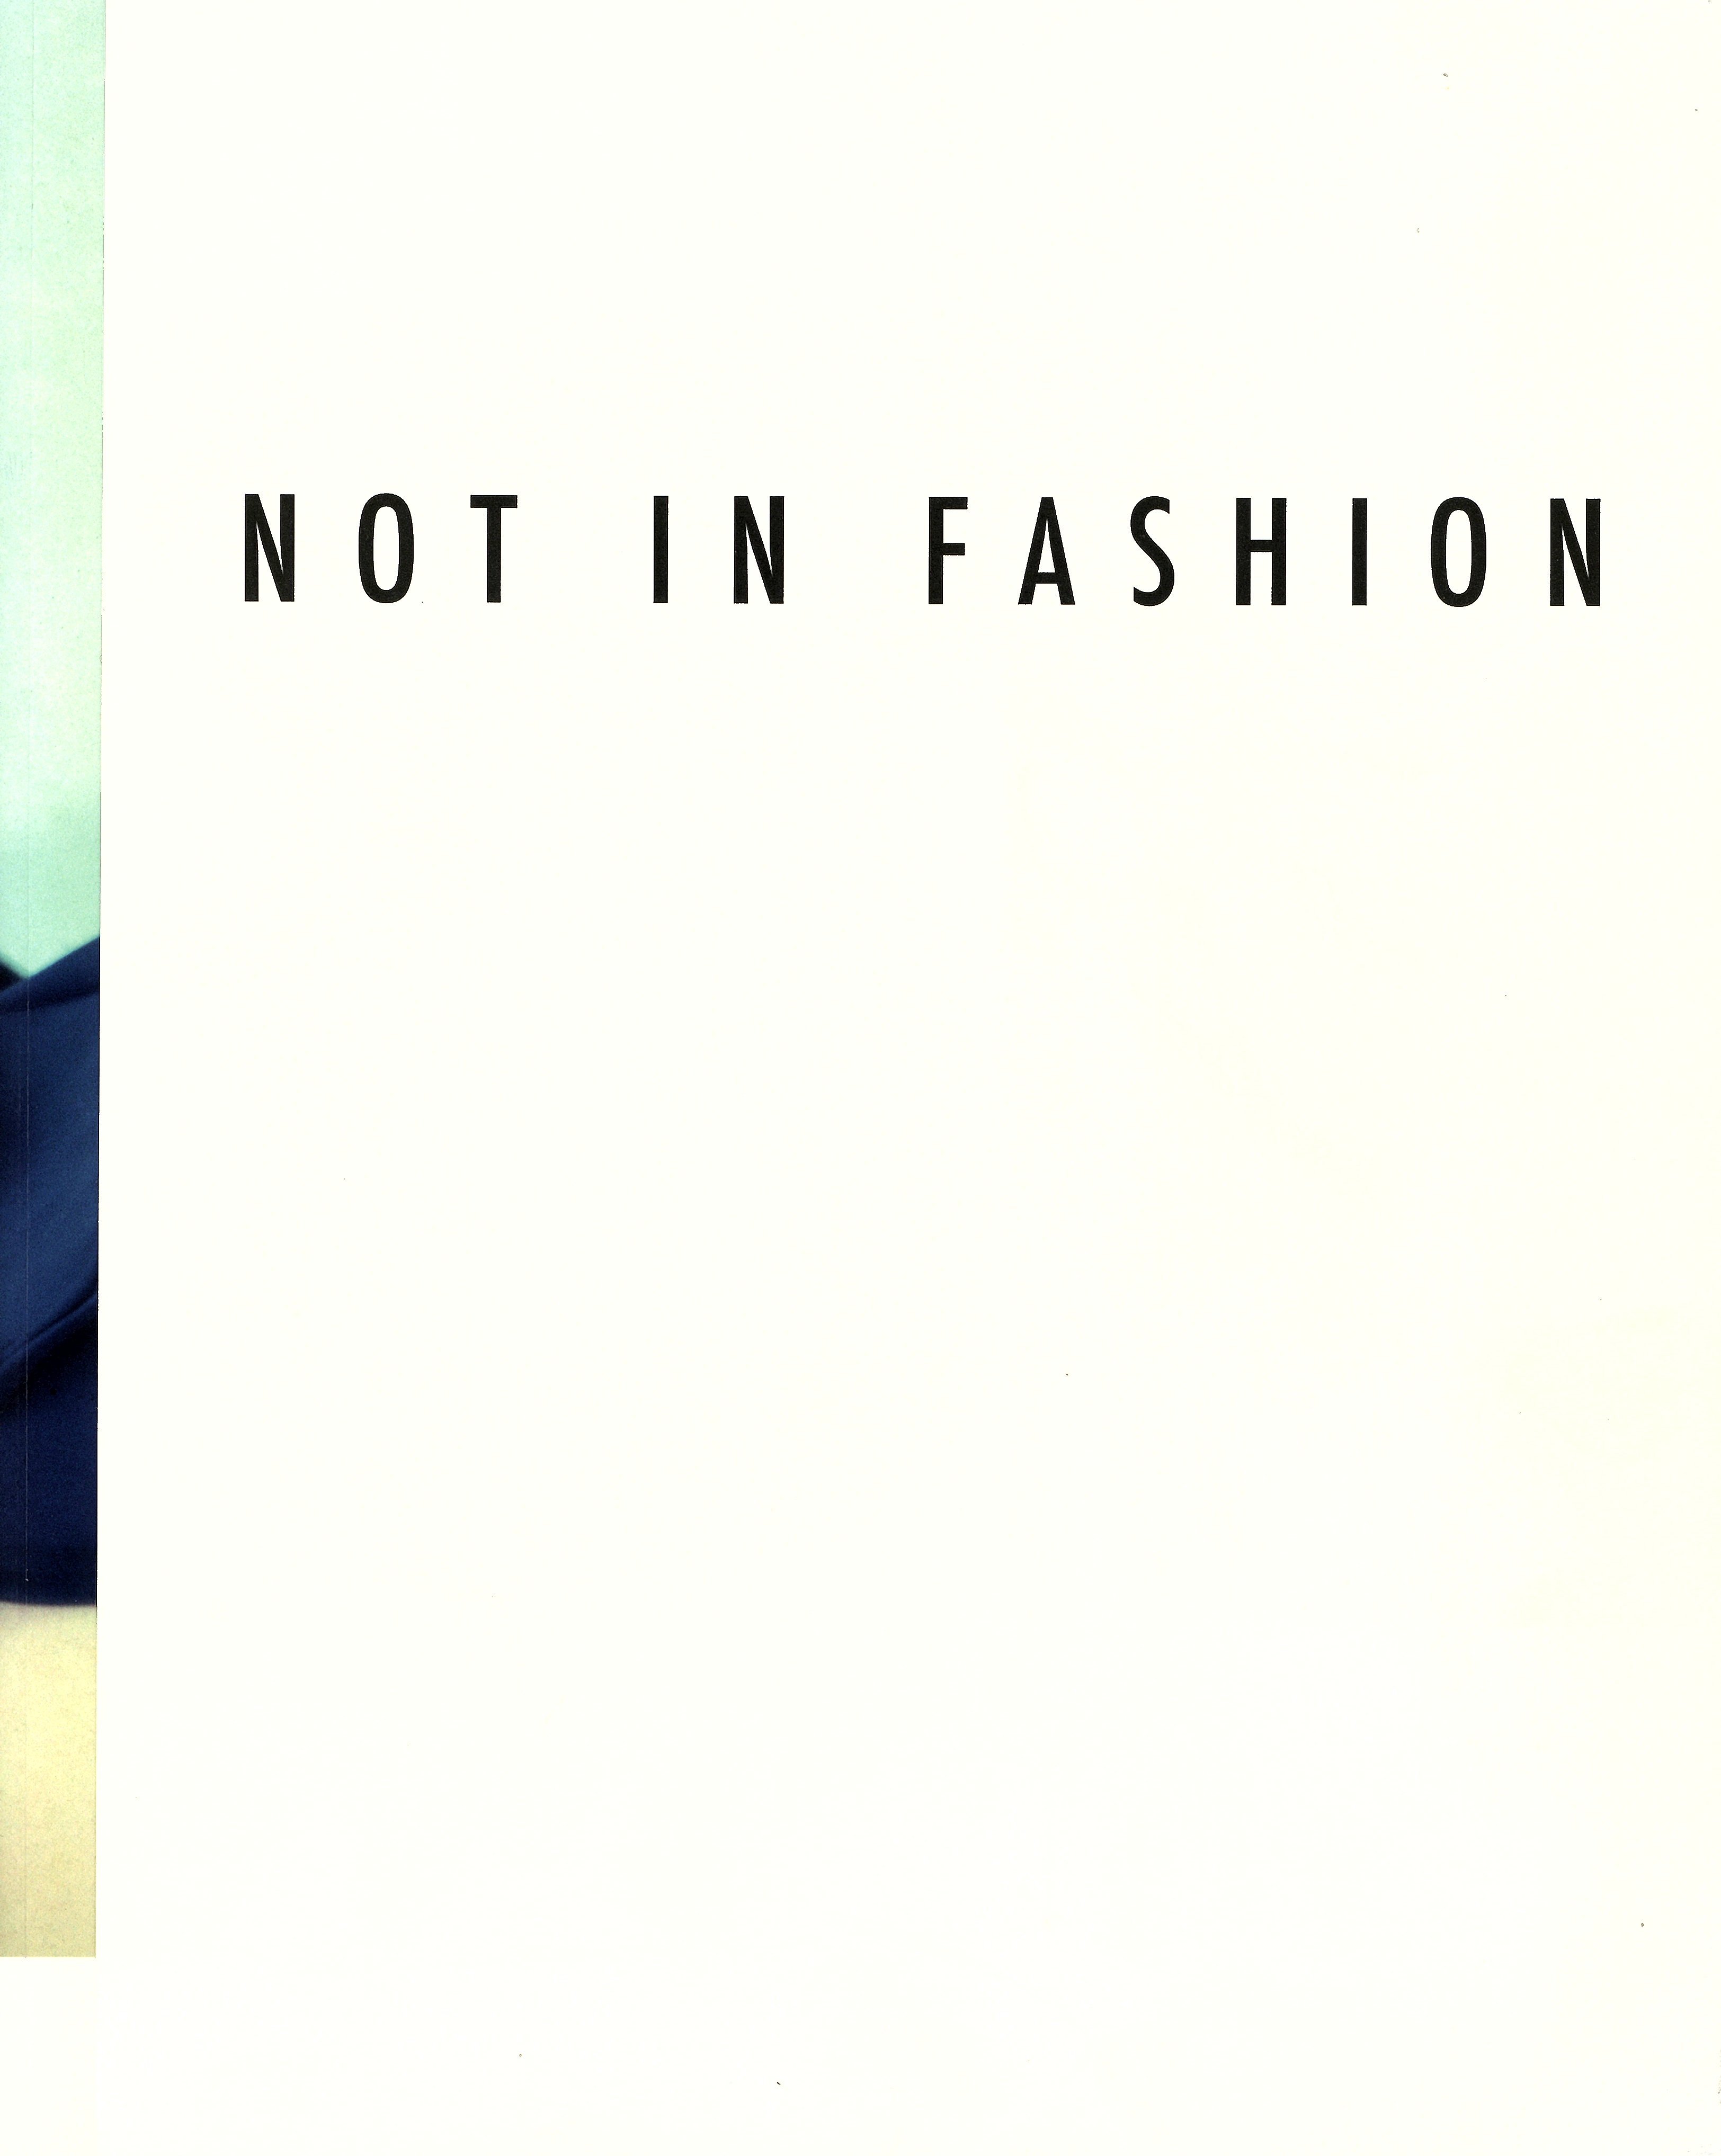 「NOT IN FASHION: PHOTOGRAPHY AND FASHION IN 90S / Mark Borthwick Juergen Teller and more」メイン画像